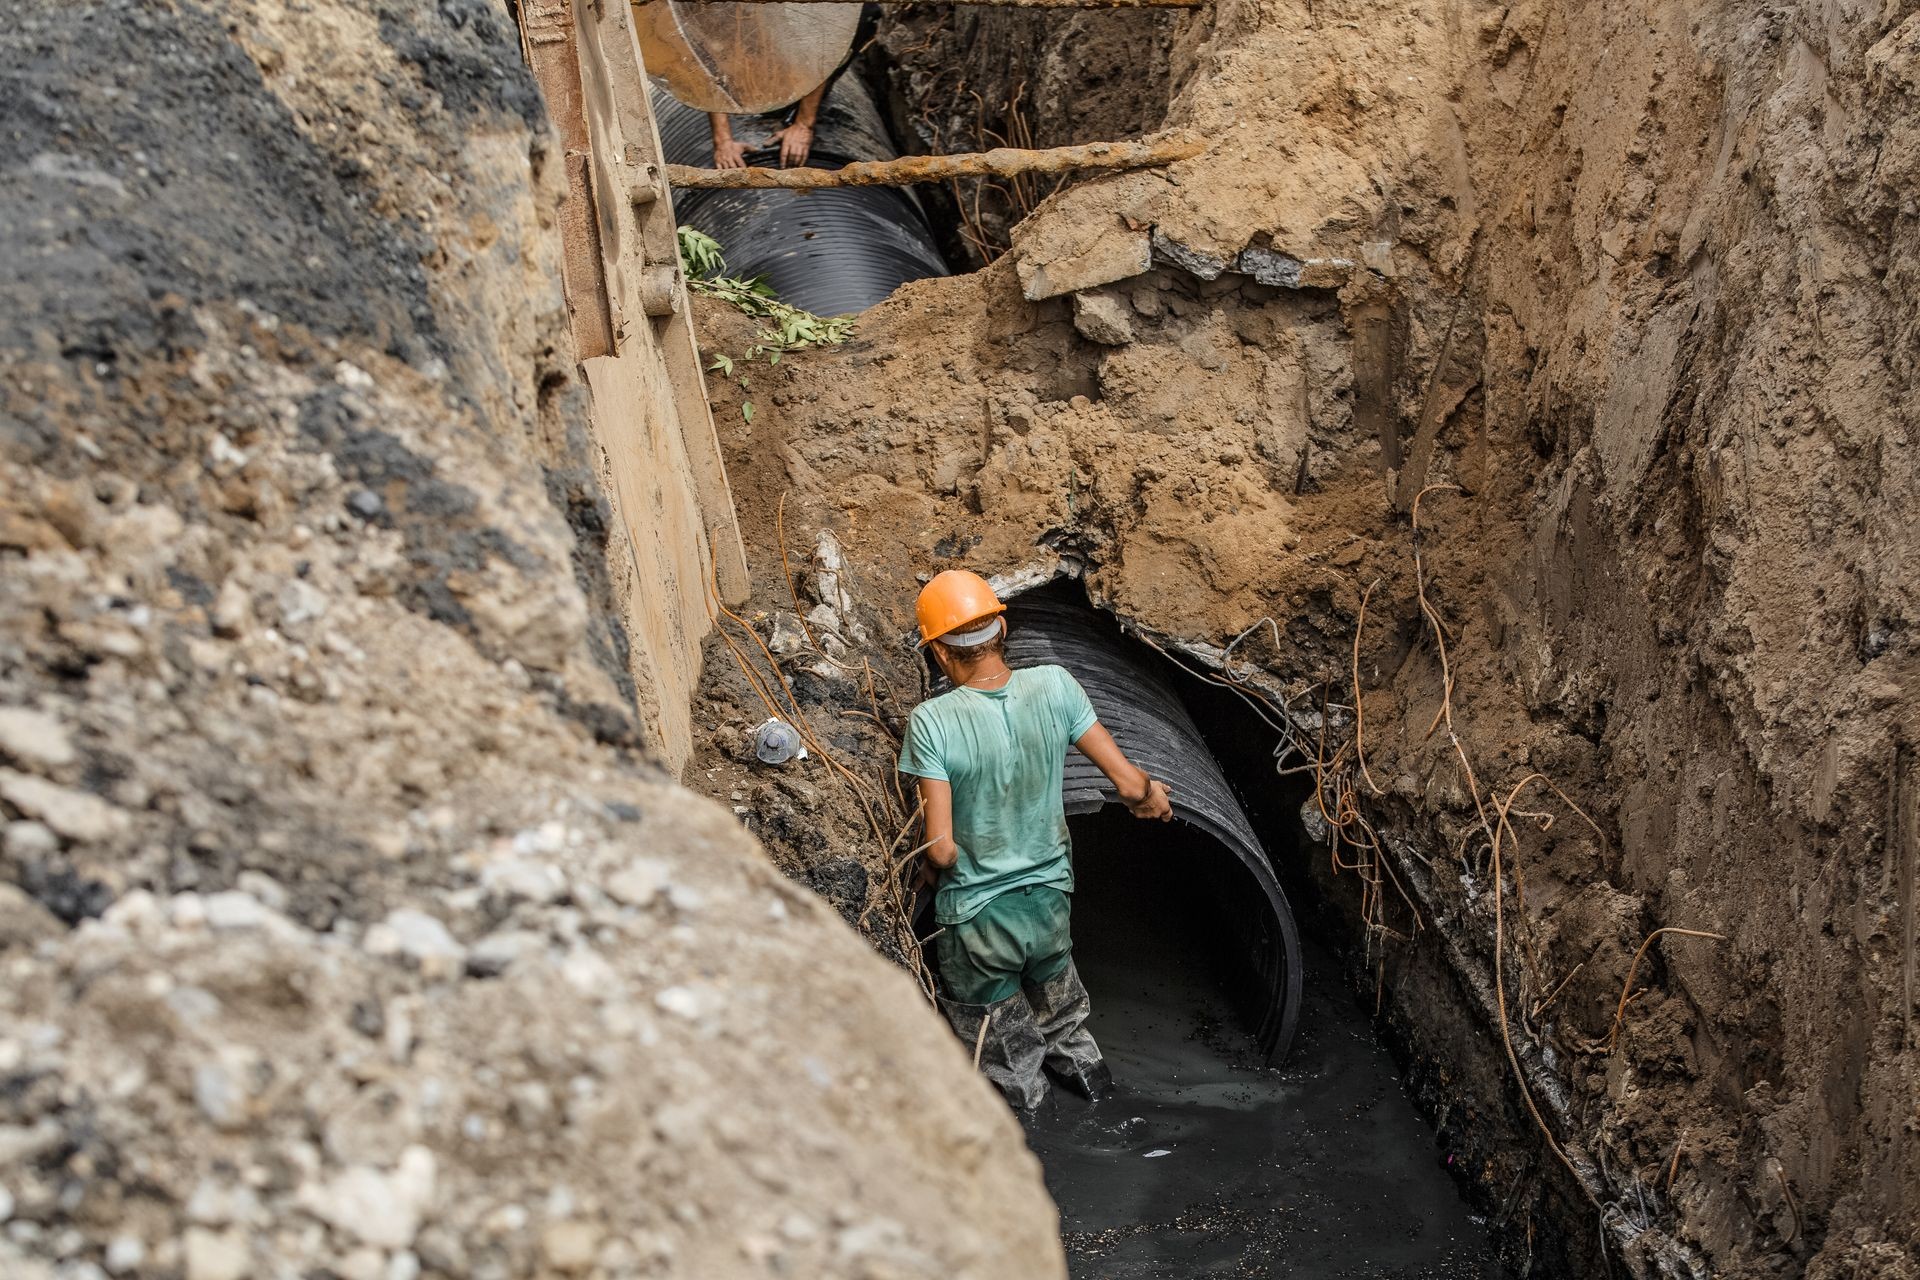 replacement of a sewer pipe deep under the ground, laying pipes under the ground, construction of a water supply line, repair of sanitary ware in Ukraine